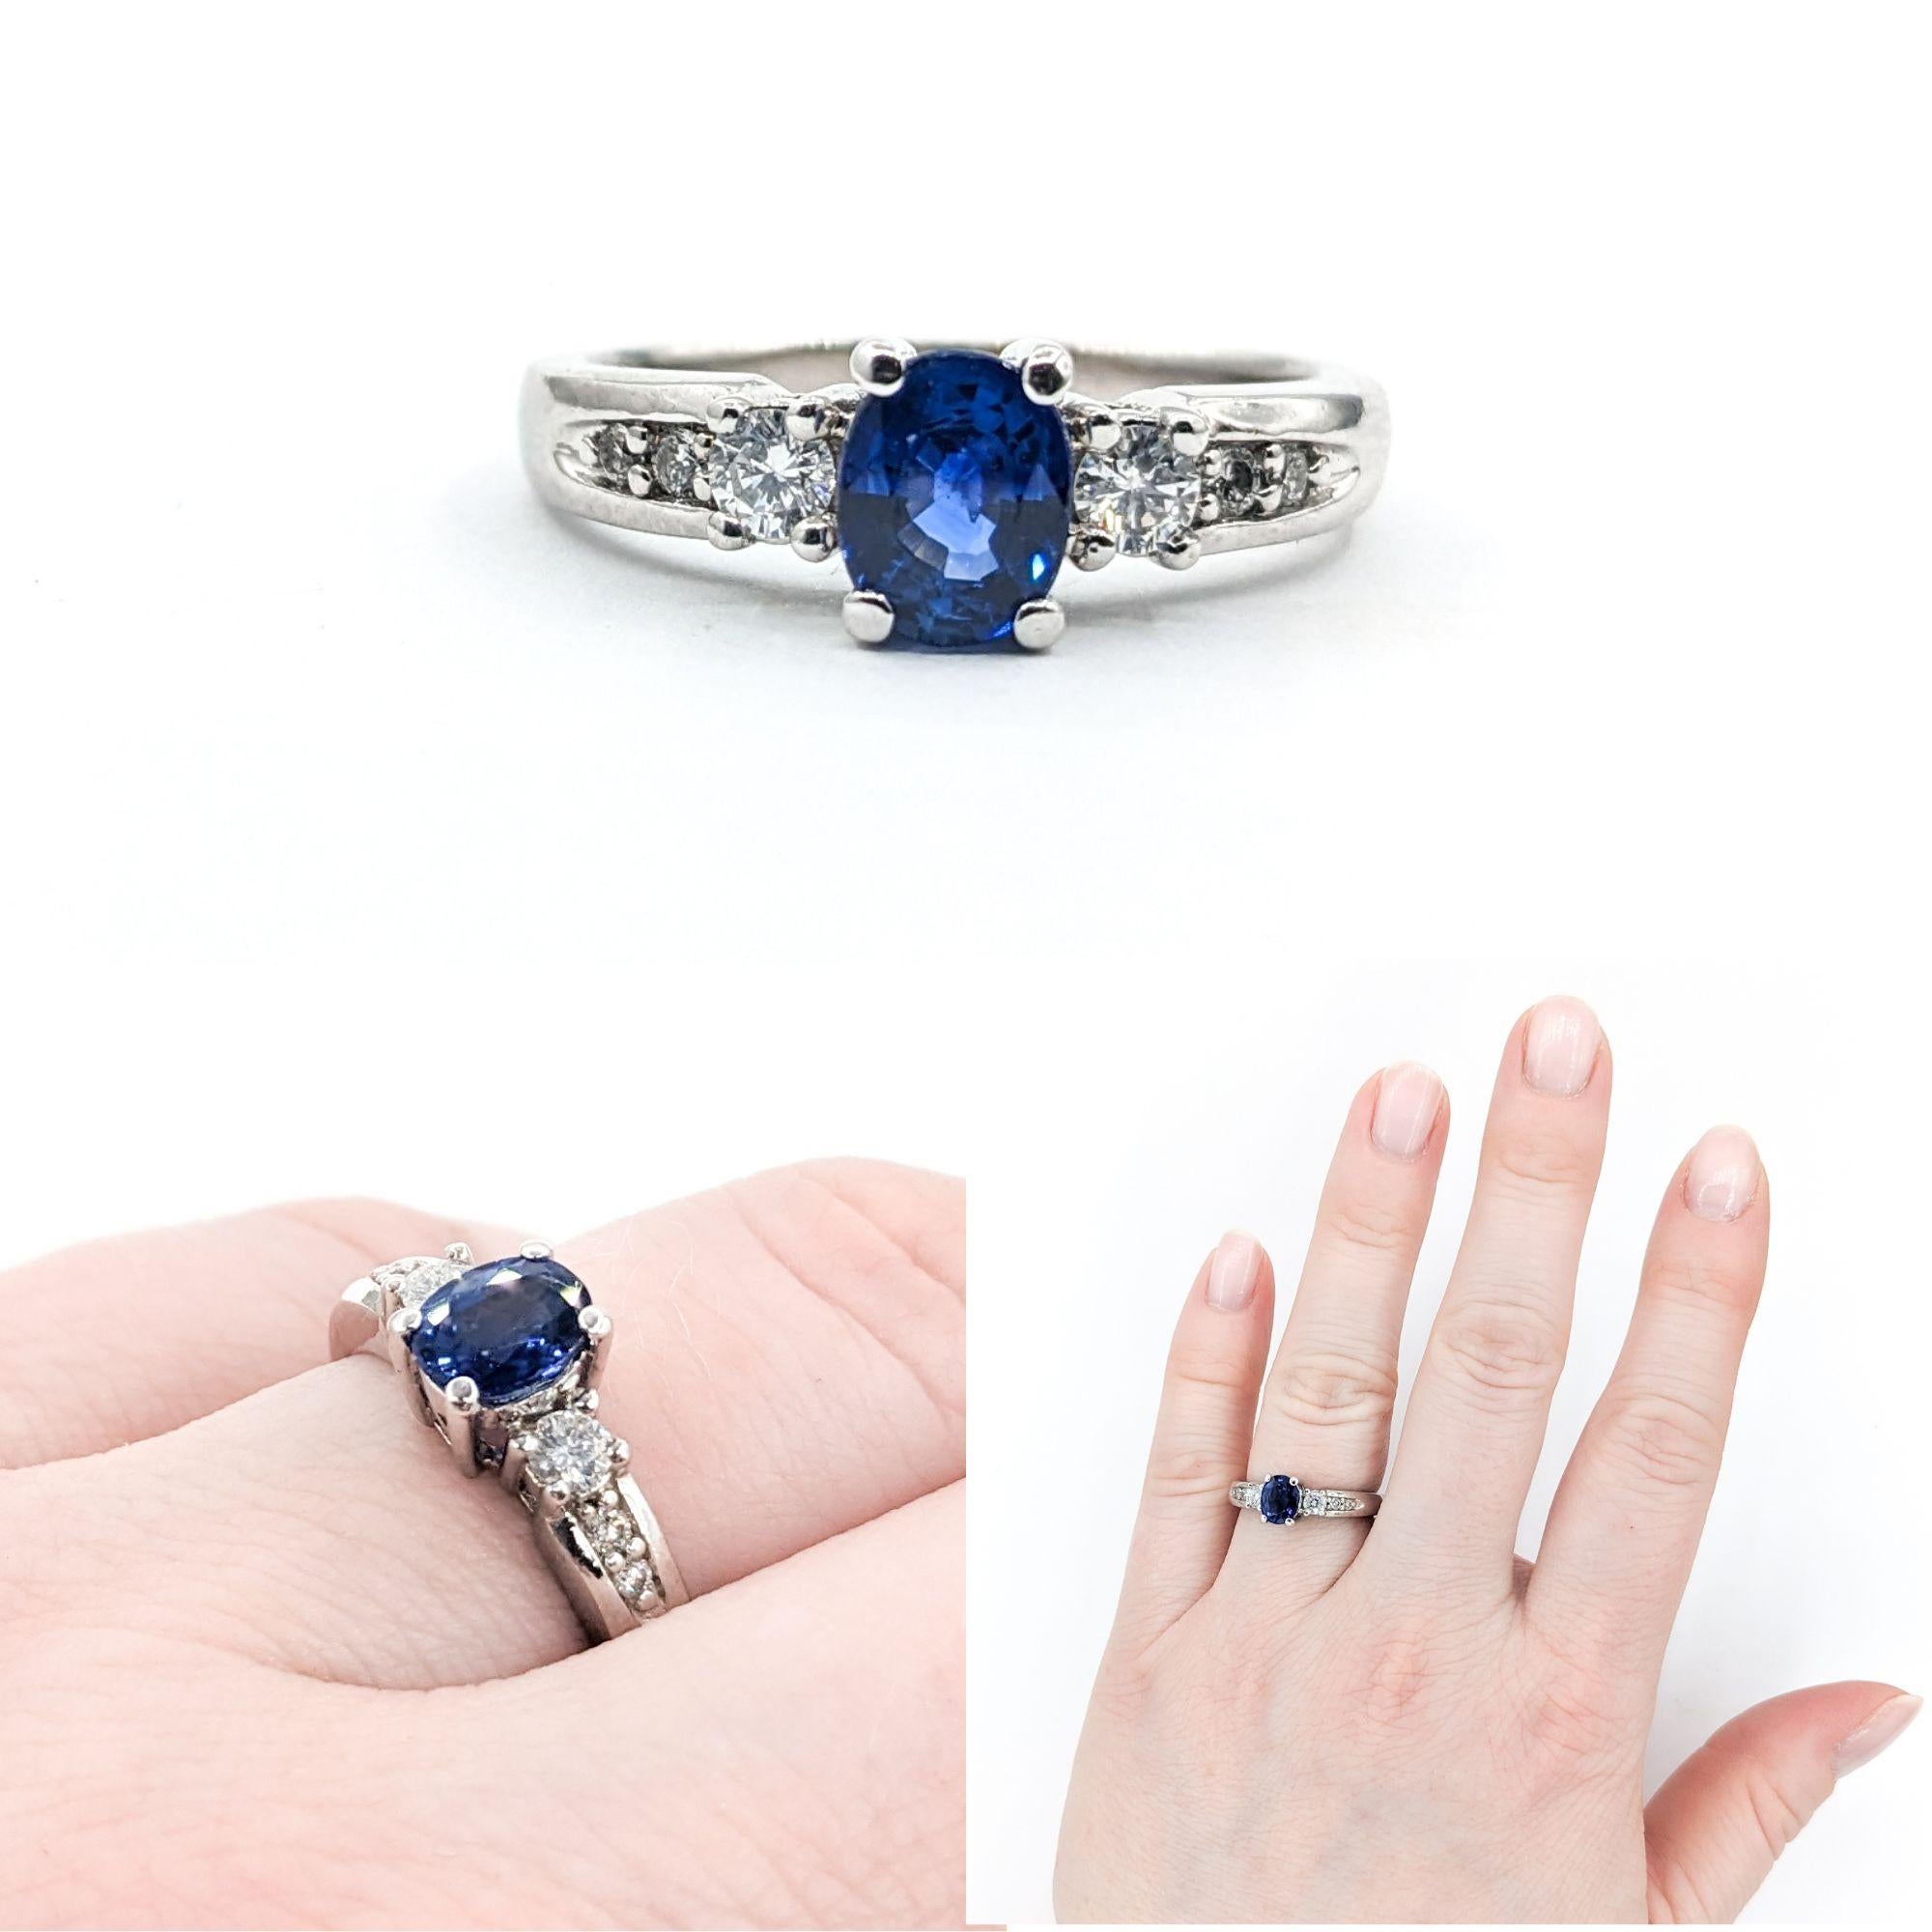 1.25ct Sapphire & Diamond Engagement Ring In White Gold

Introducing a stunning Gemstone Engagement Ring, beautifully crafted in 14k White Gold. This ring is a symbol of elegance, featuring a magnificent 1.25ct Sapphire centerpiece, surrounded by